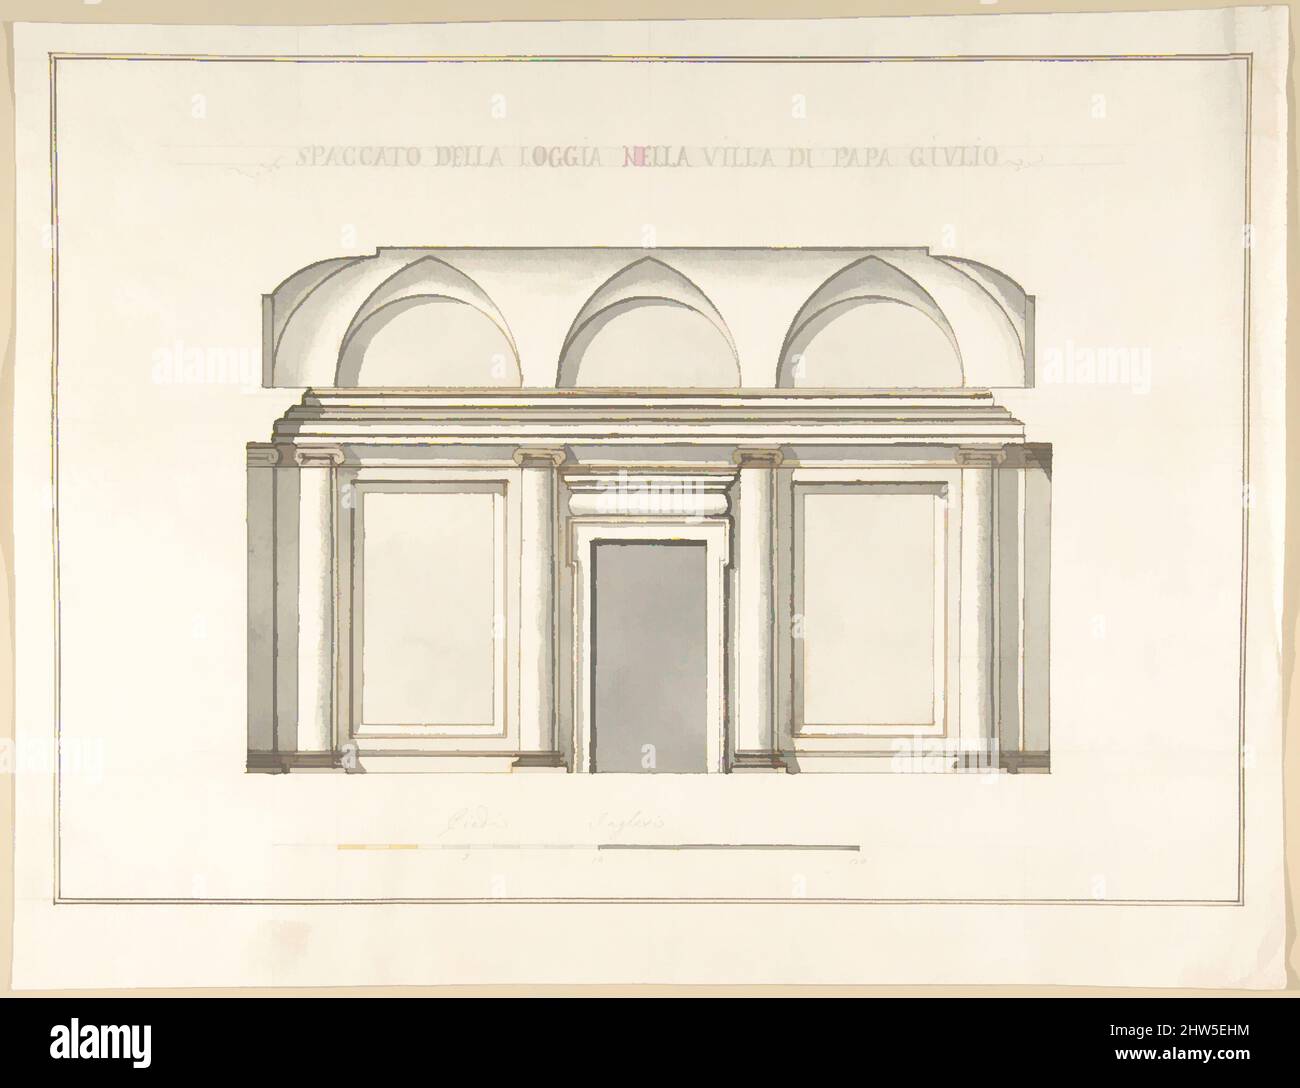 Art inspired by Section of the Loggia in the Villa of Pope Julius III., 1710–27, Pen and brown ink, brush and gray wash, over ruling in graphite, 12-1/4 x 15-7/8 in. (31.1 x 40.4 cm), Drawings, Pietro Paolo Coccetti (Cocchetti) (Italian, documented Rome, 1710–1727, Classic works modernized by Artotop with a splash of modernity. Shapes, color and value, eye-catching visual impact on art. Emotions through freedom of artworks in a contemporary way. A timeless message pursuing a wildly creative new direction. Artists turning to the digital medium and creating the Artotop NFT Stock Photo